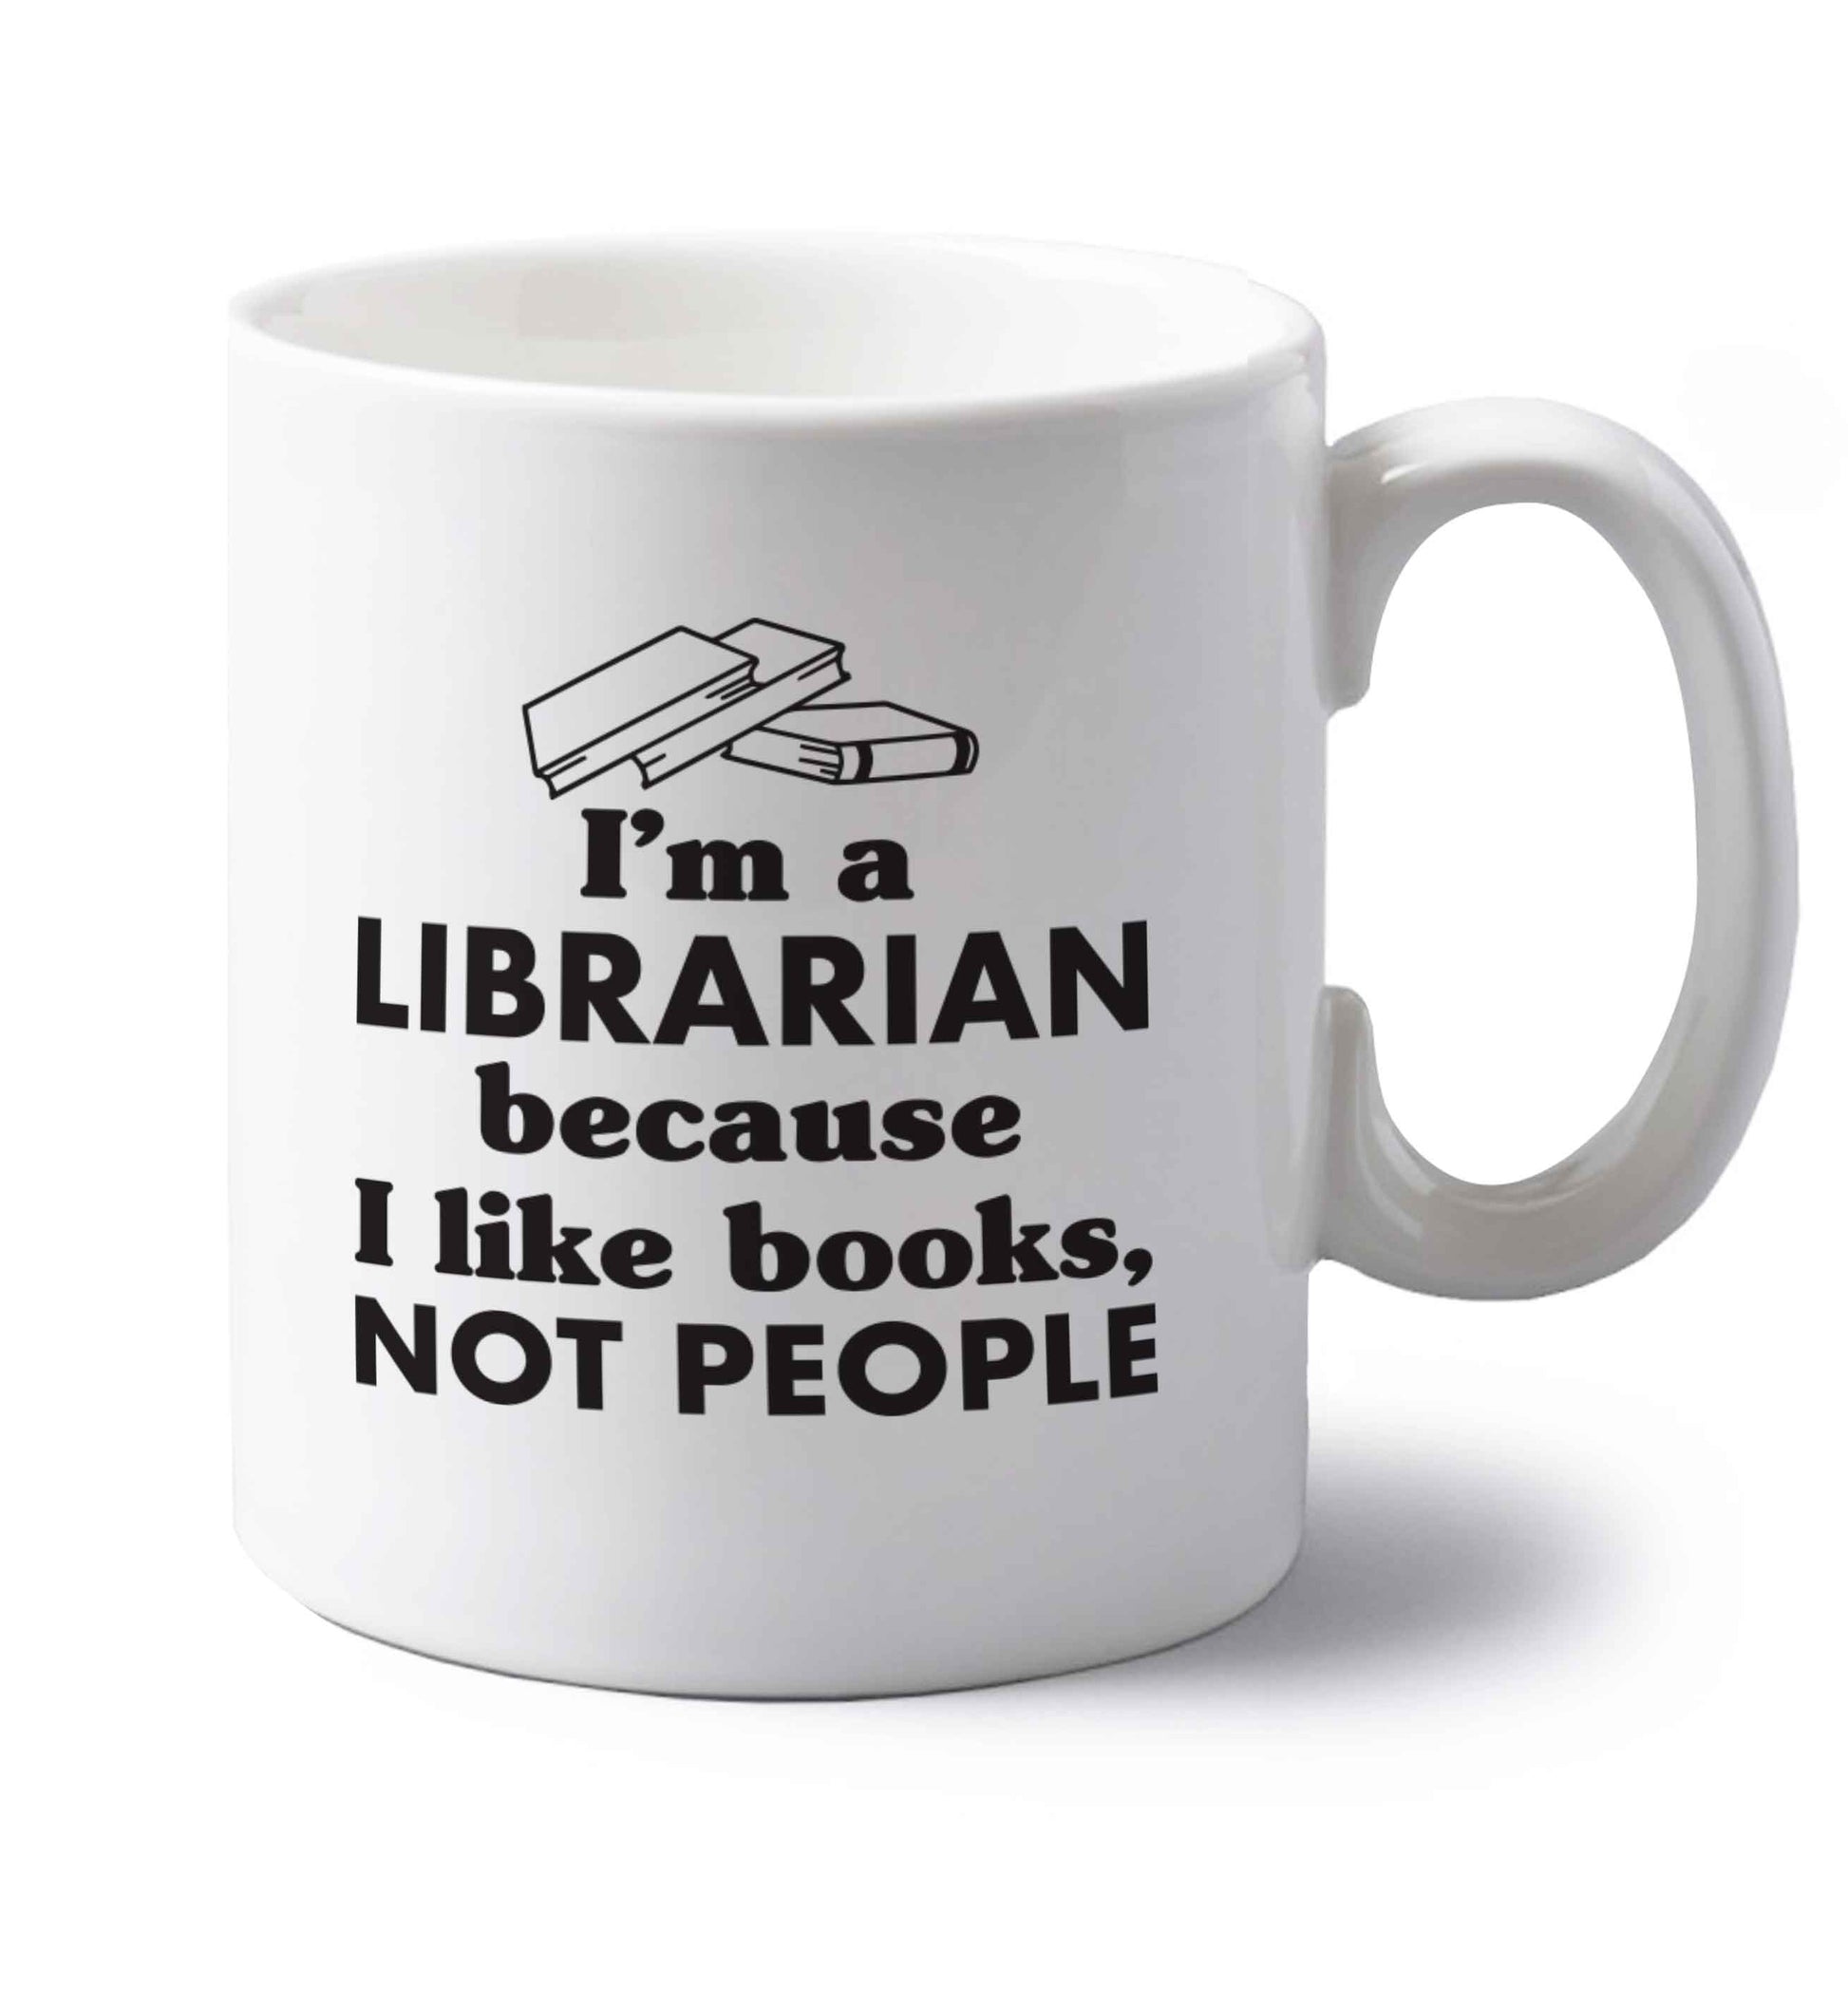 I'm a librarian because I like books not people left handed white ceramic mug 